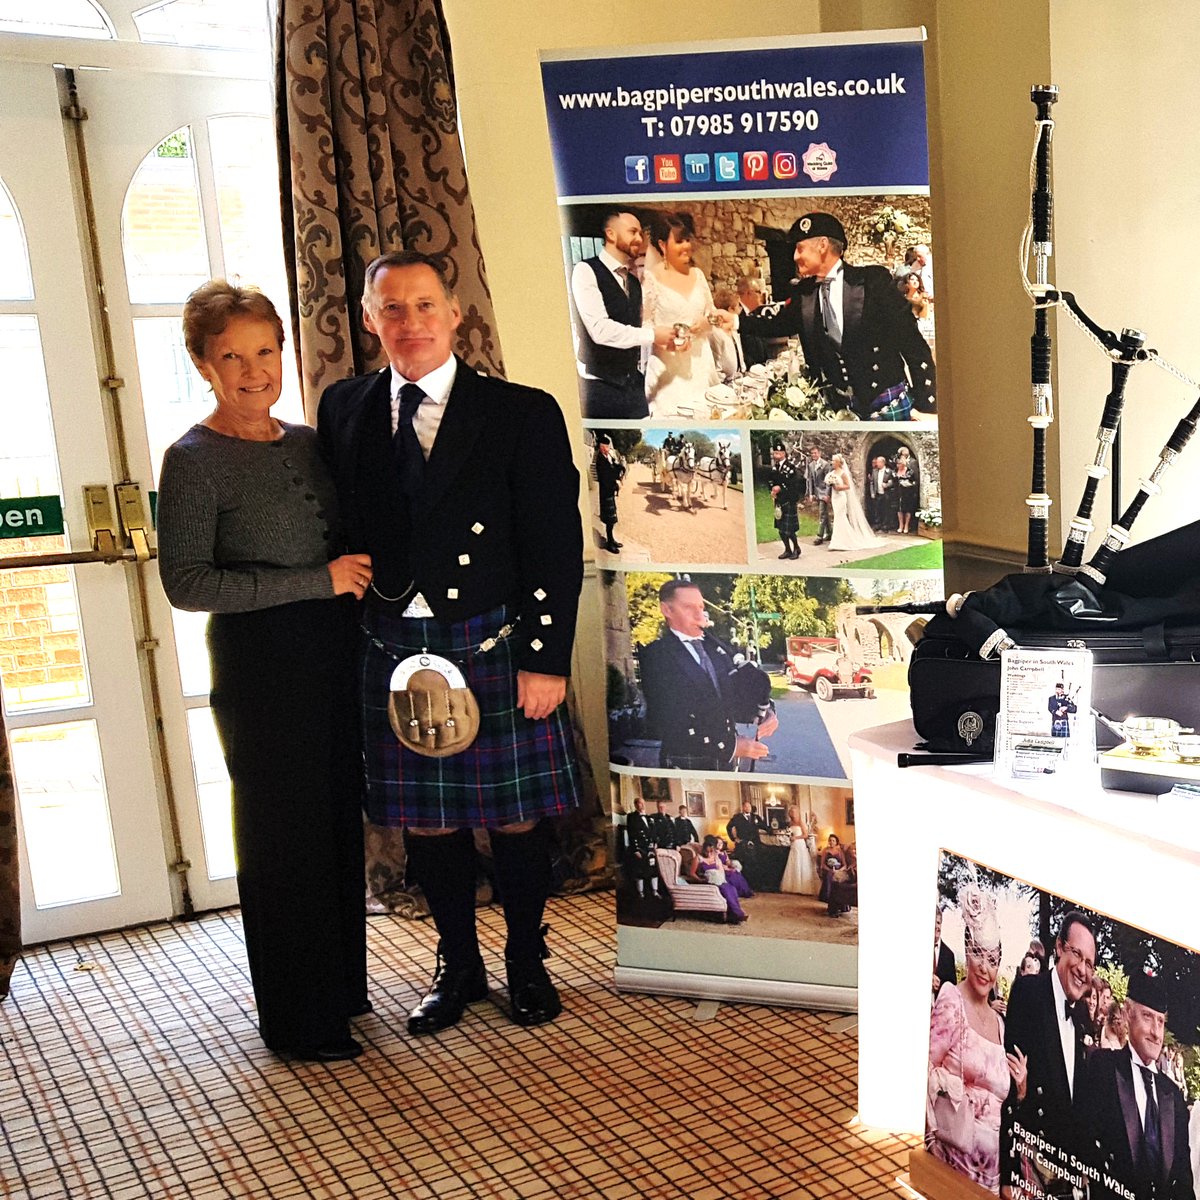 #TeamBagpipesWales would like to Thank #HeritagePark Staff for inviting us to today's Wedding Showcase.
A very successful day & Thanks to all who came to speak to us :-)

#BagpiperWales #Bagpipes #Pontypridd #Porth #Trehafod #Tonypandy #Treorchy #Caerphilly #TalbotGreen #Aberdare